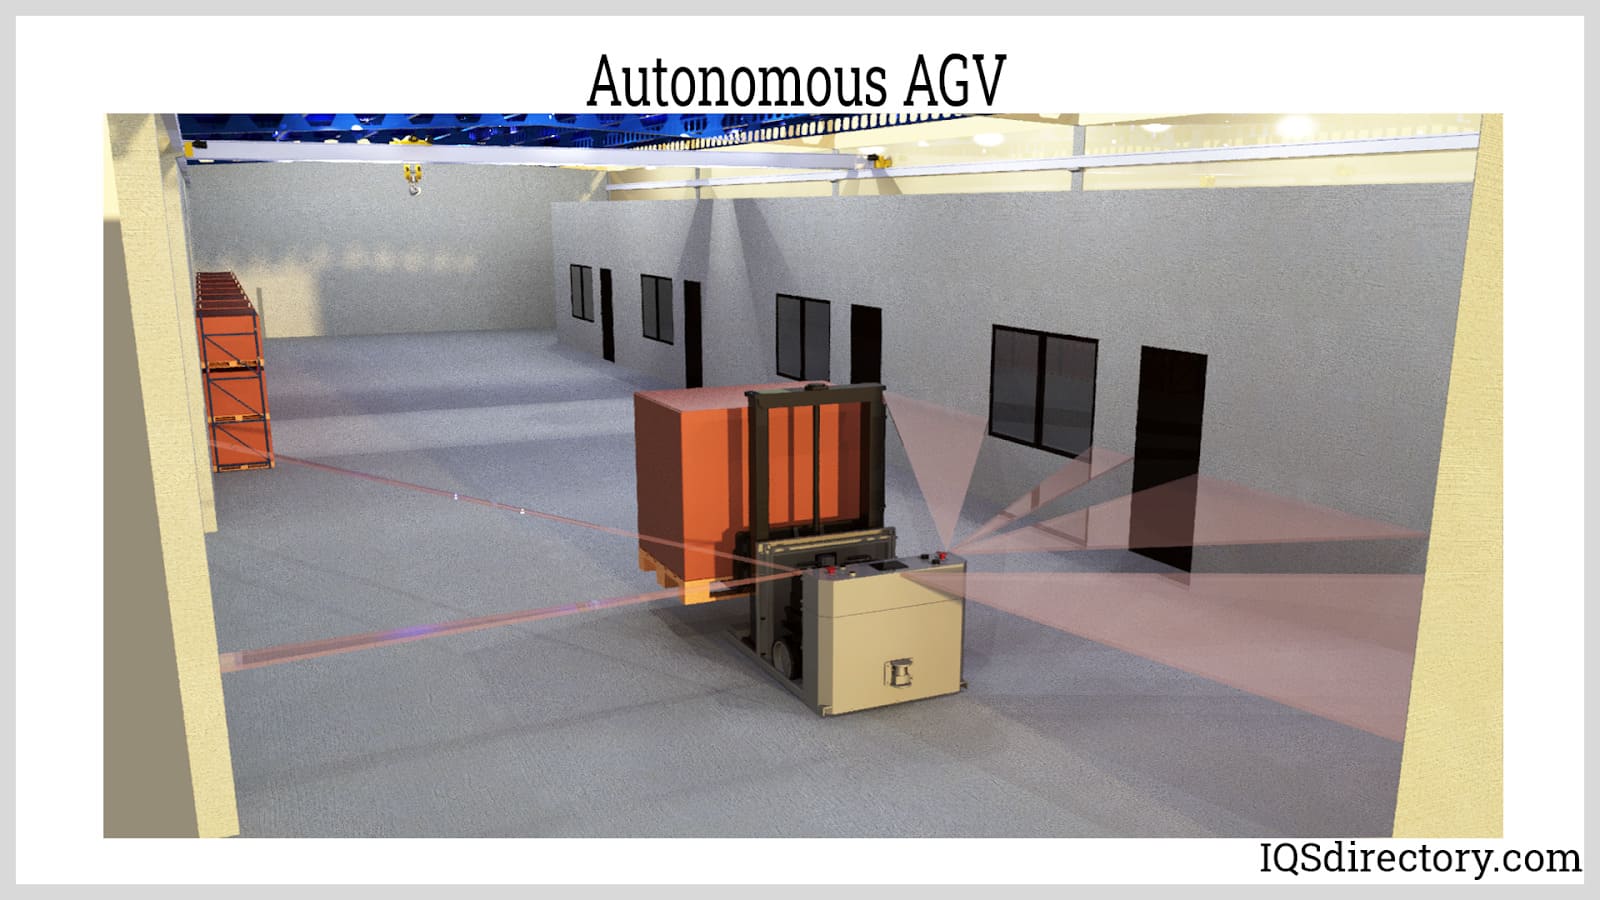 ieee research papers on automated guided vehicle